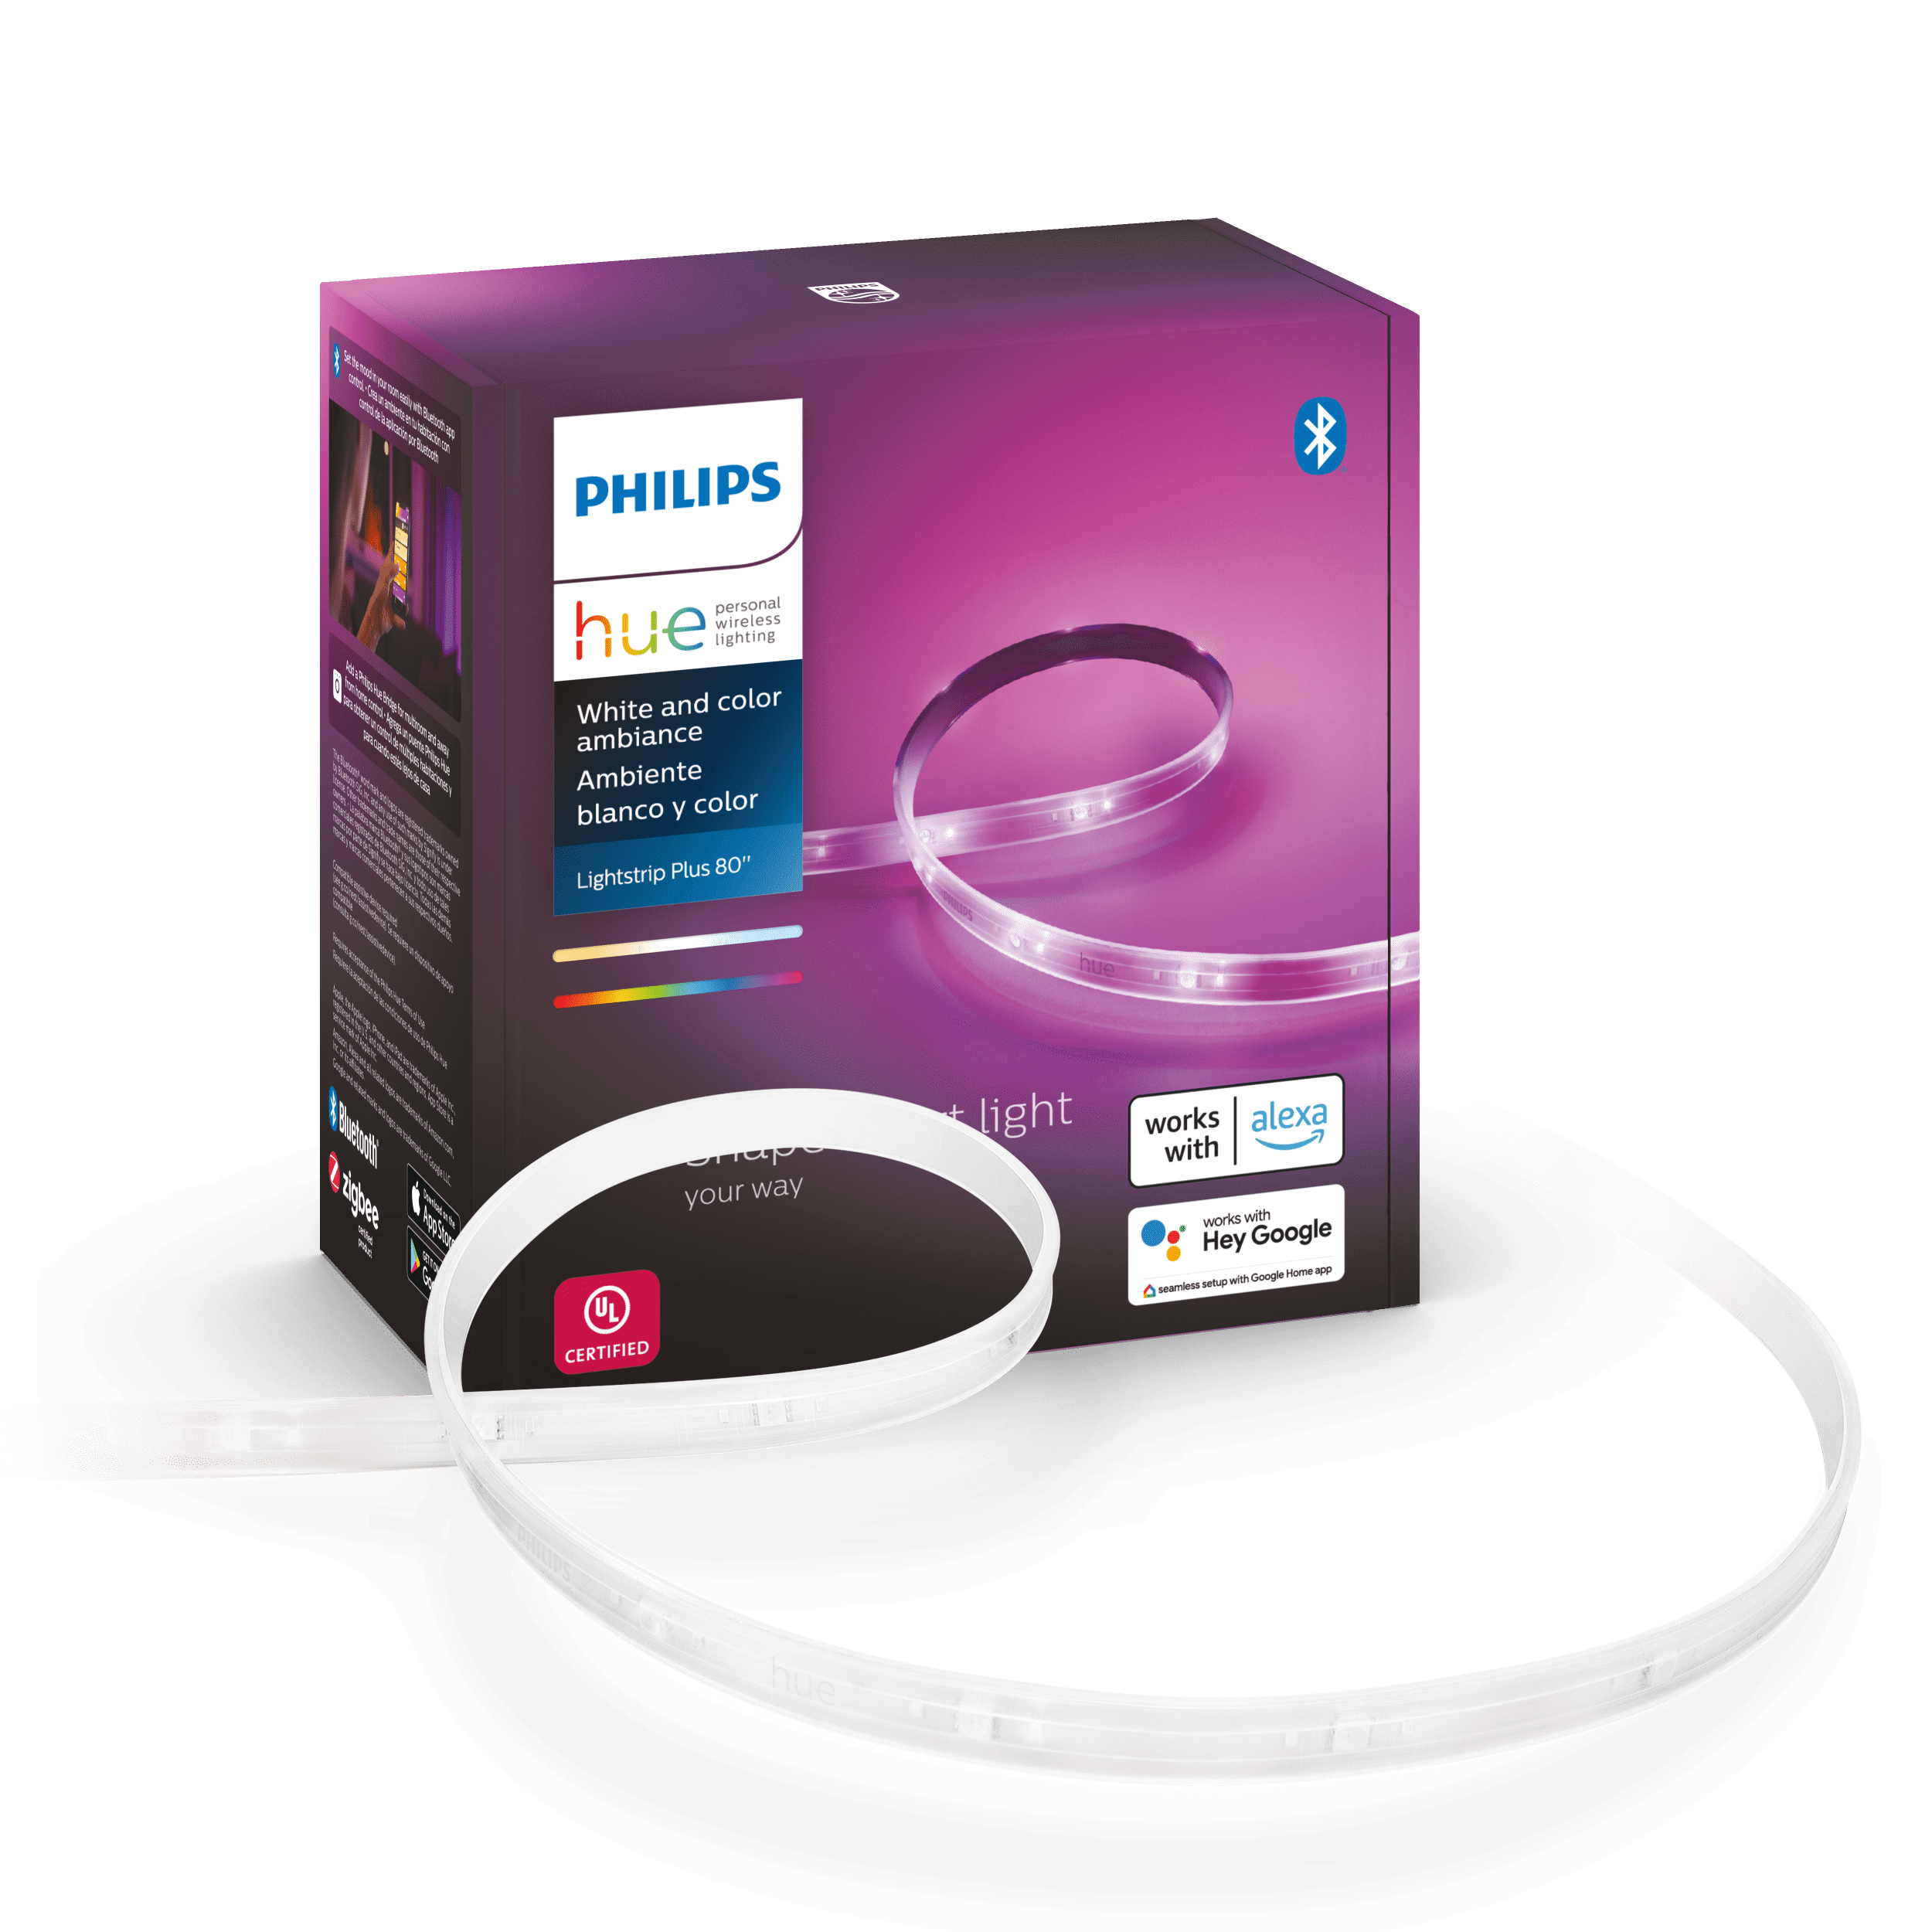 Philips Hue White and Color Ambiance Lightstrip Plus Feet Base Kit with Bluetooth, White - Walmart.com